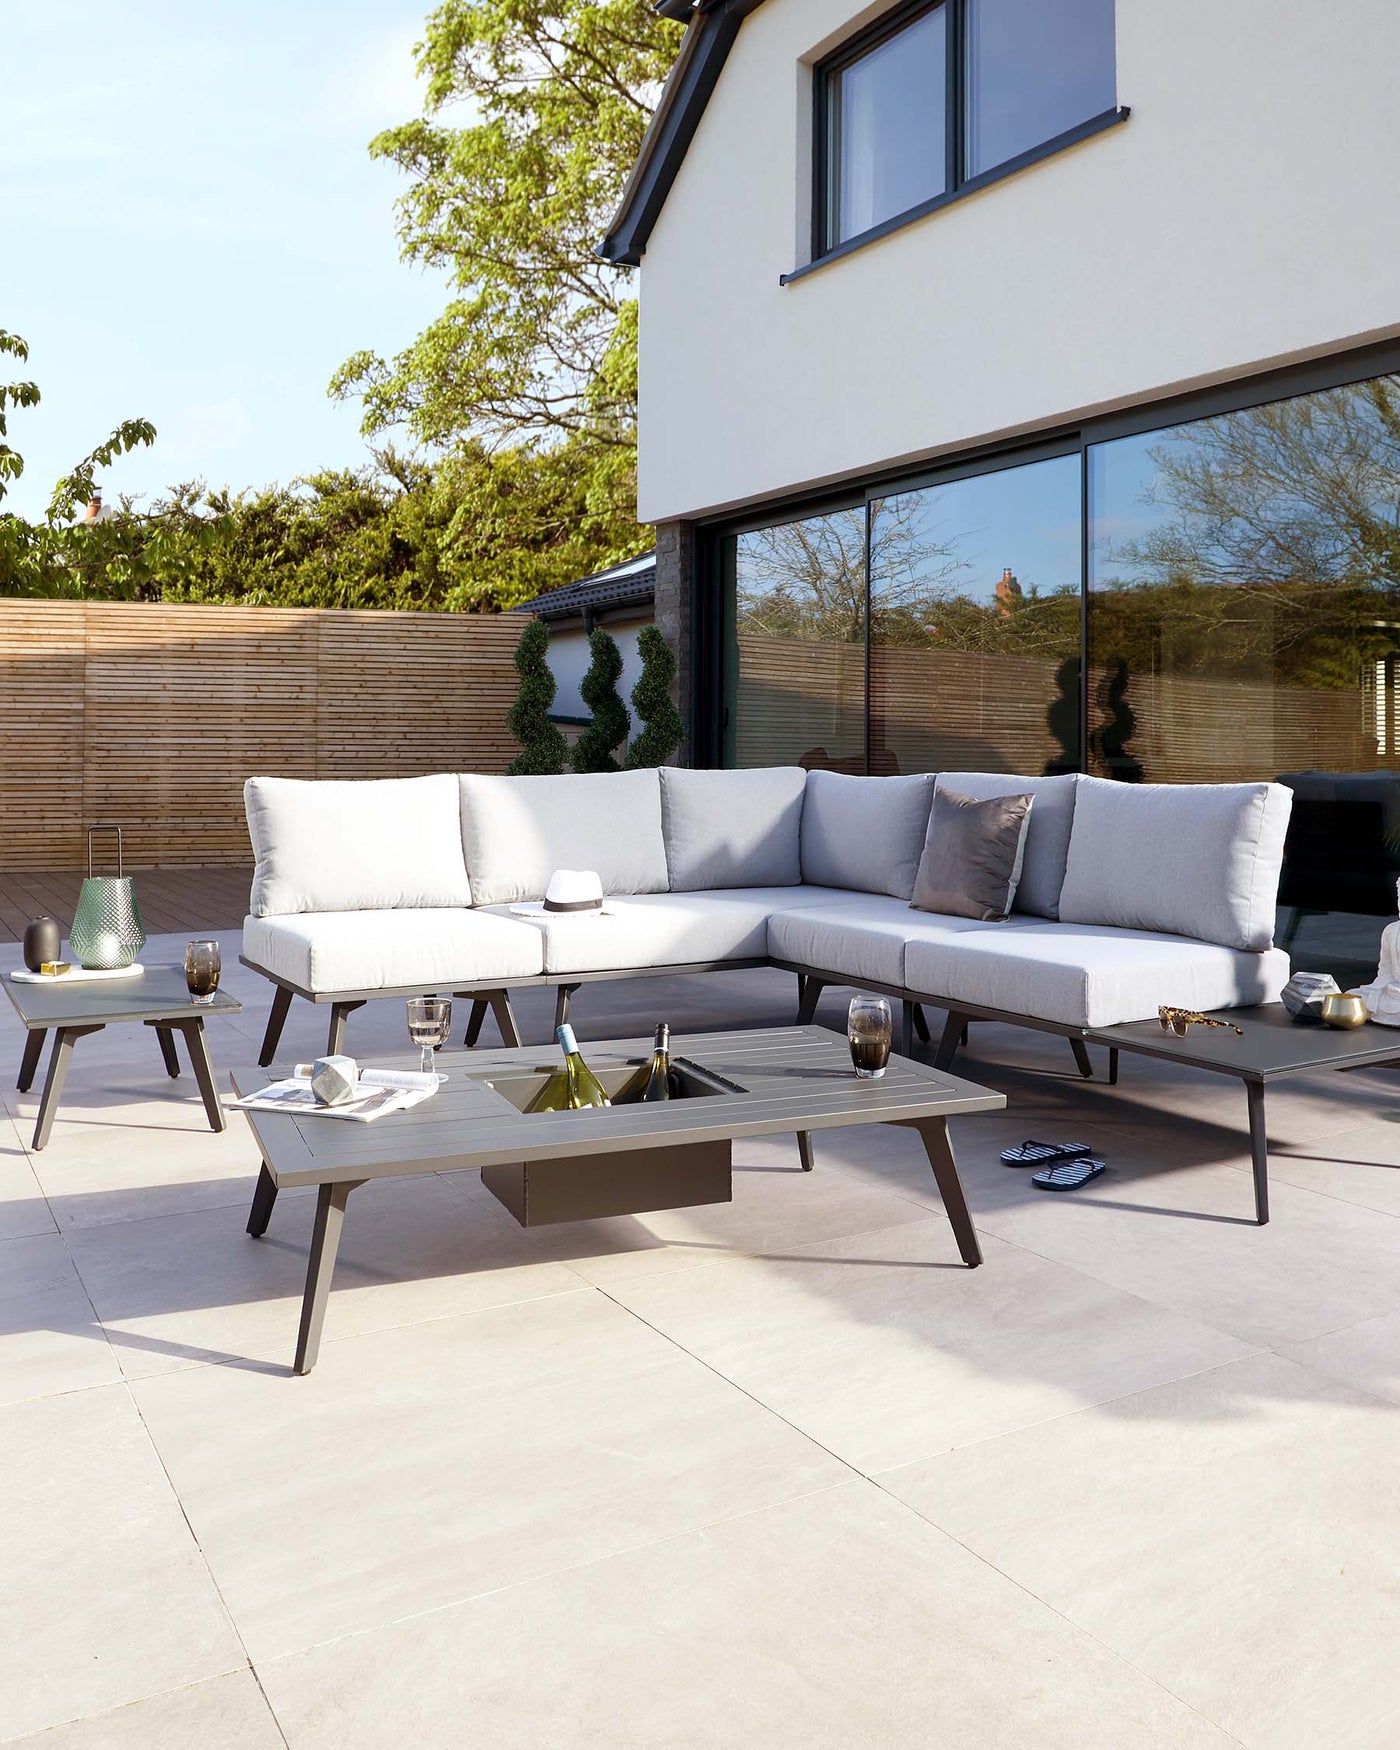 Modern outdoor furniture set featuring a sleek, taupe-coloured sectional sofa with plush light grey cushions and matching accent pillows, accompanied by two minimalist geometric side tables and a rectangular coffee table, all in a coordinating dark metal finish, displayed on an elegant patio.